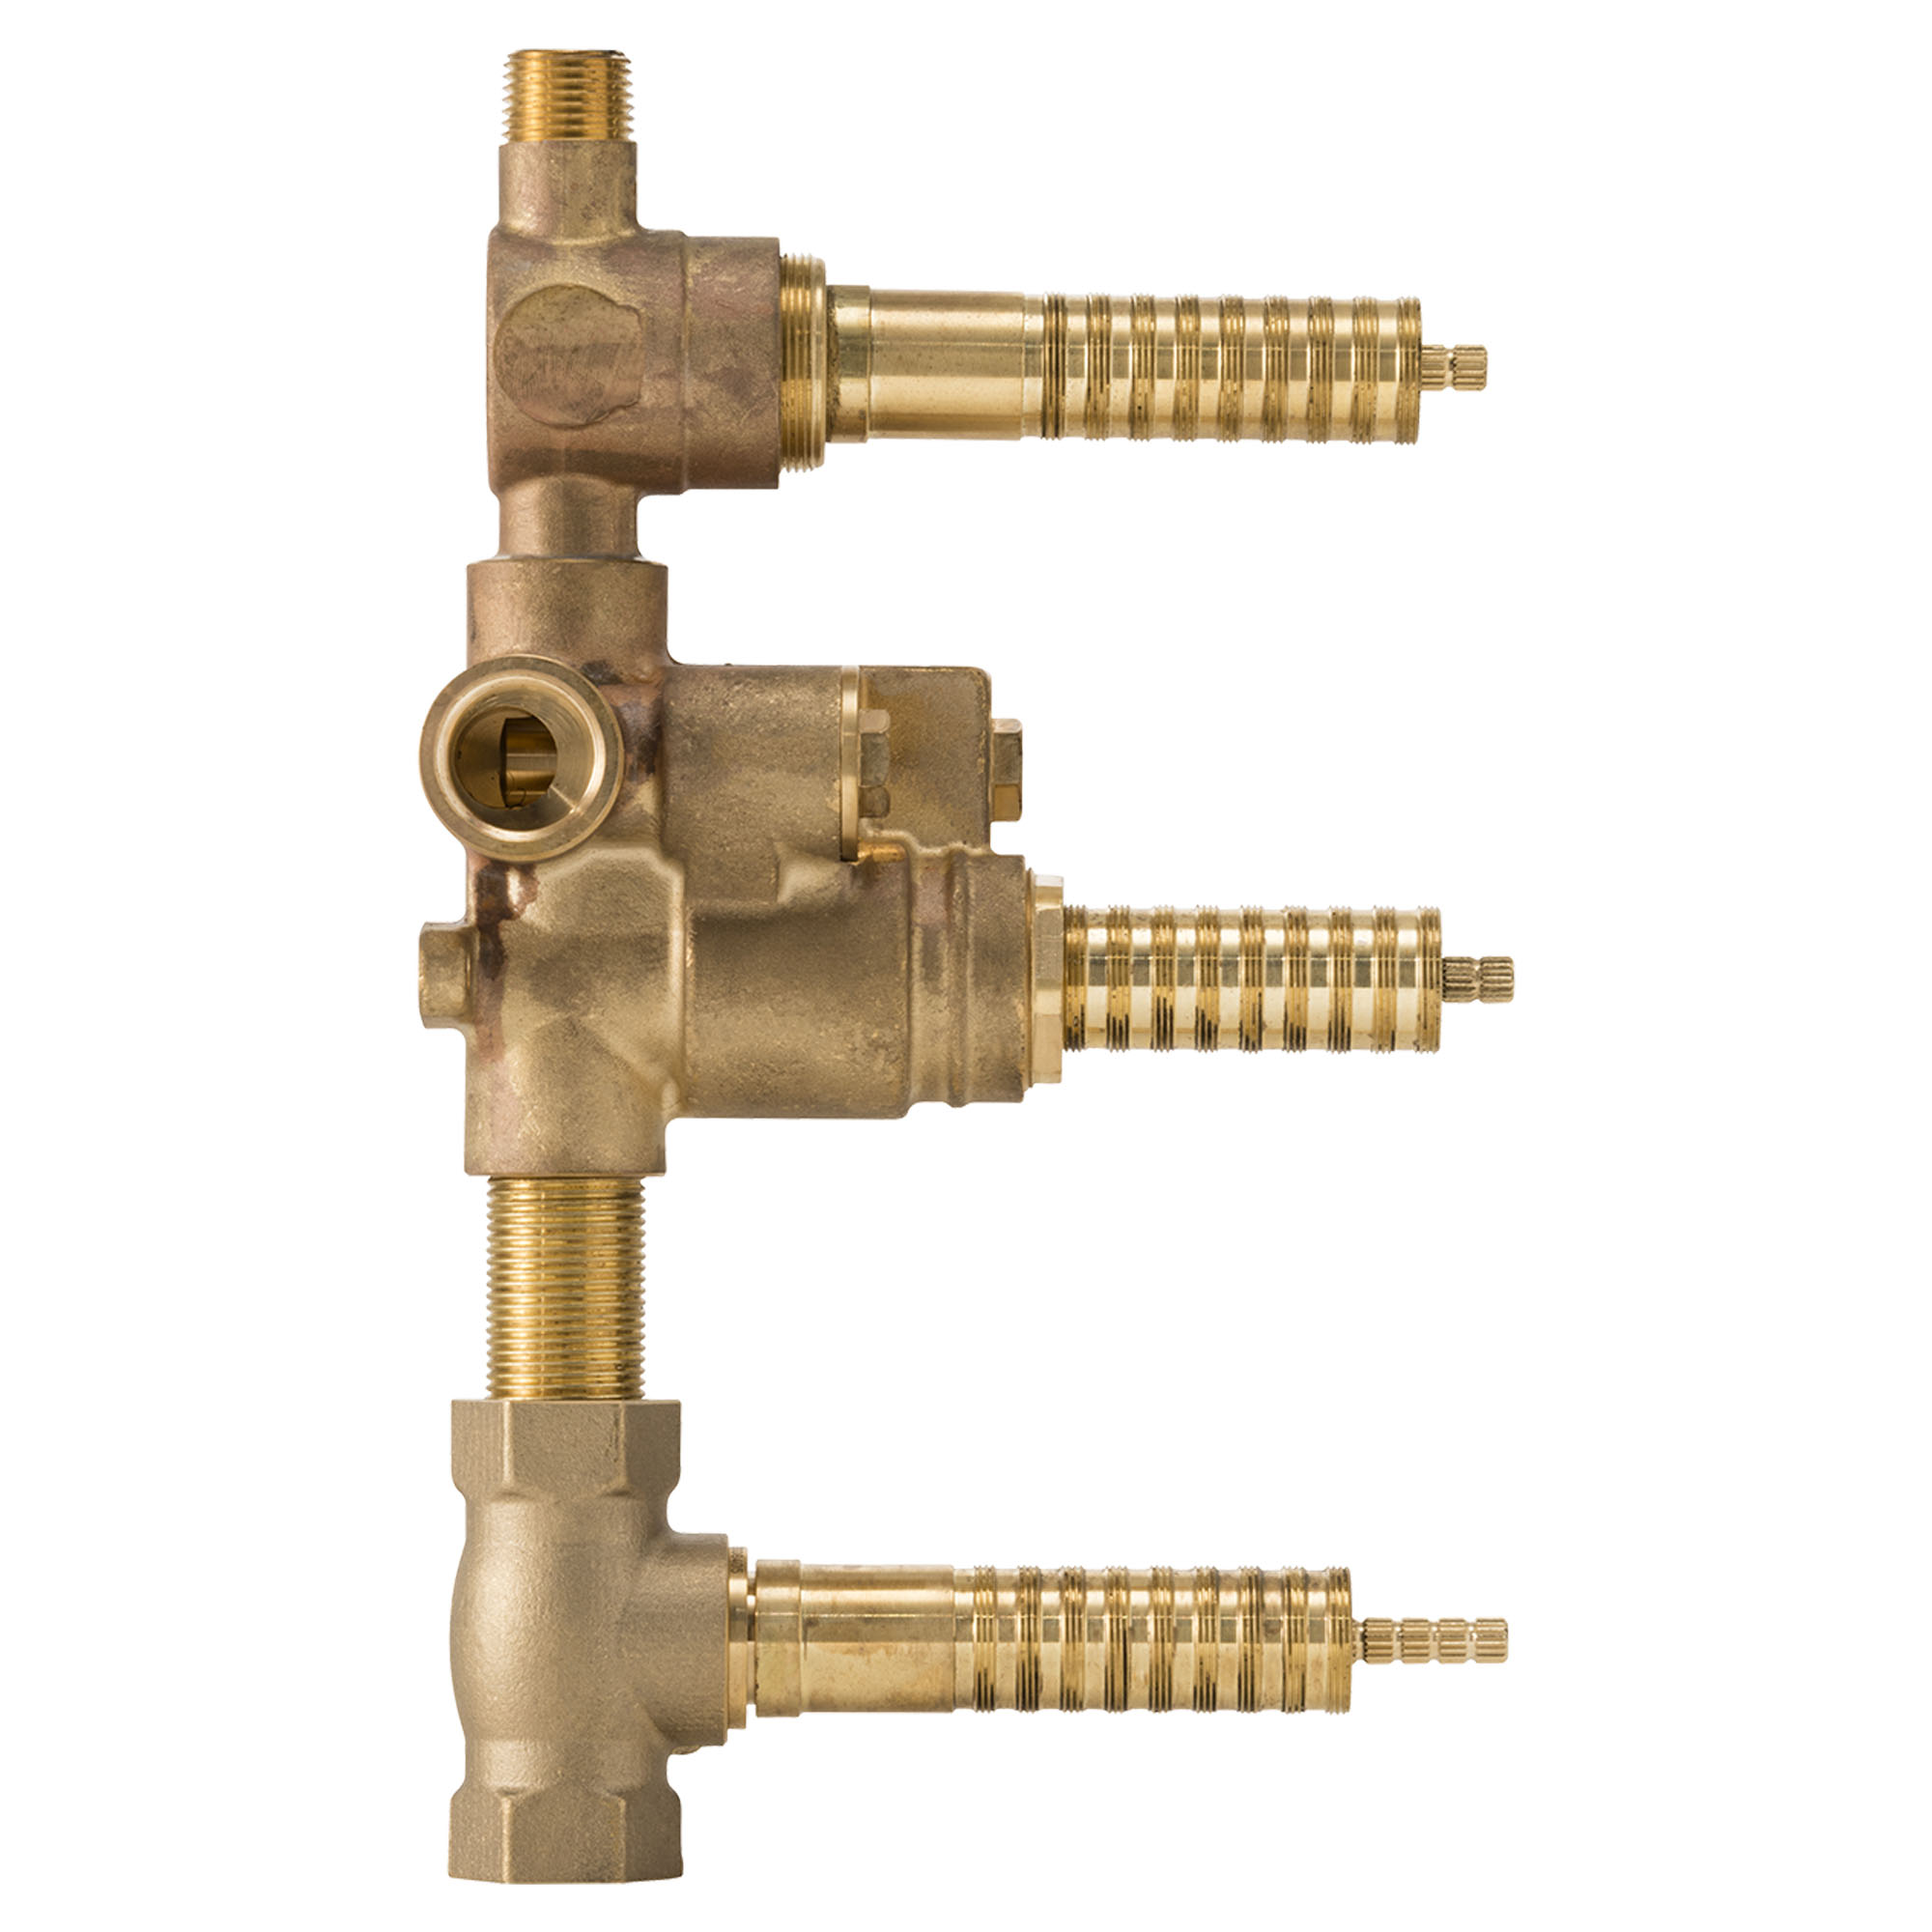 3-Handle Thermostatic Rough Valve with 2-Way Diverter Shared Functions